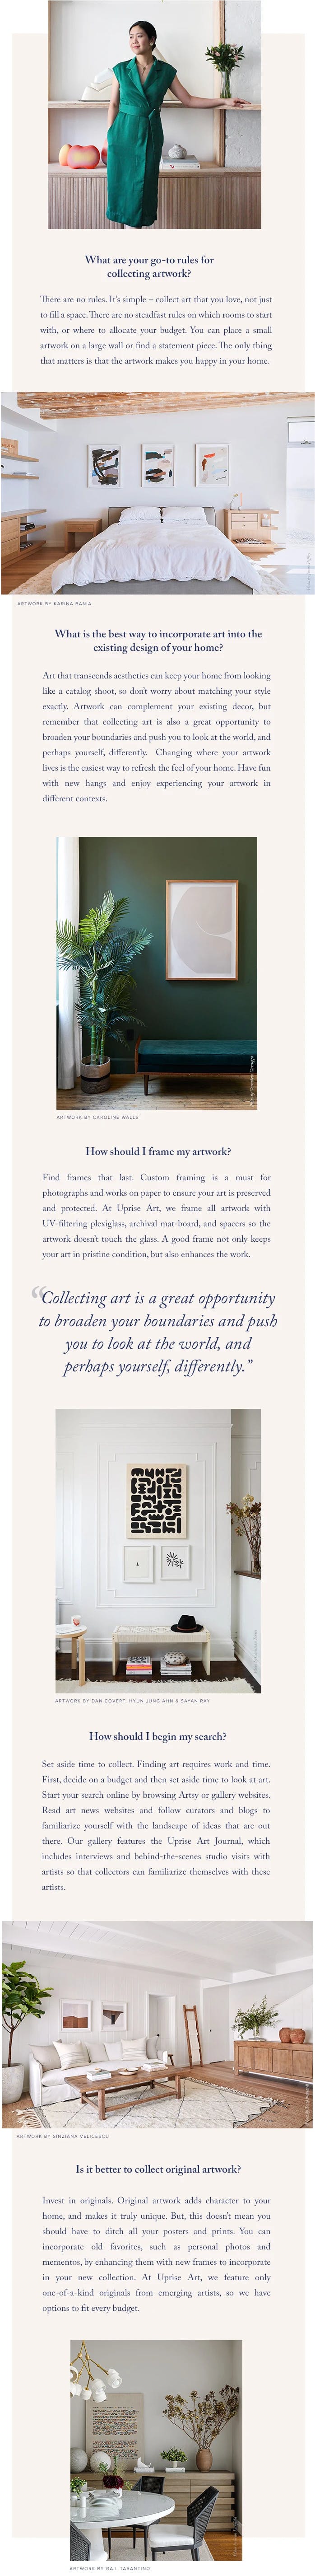 Journal: How to build your art collection: Gallery